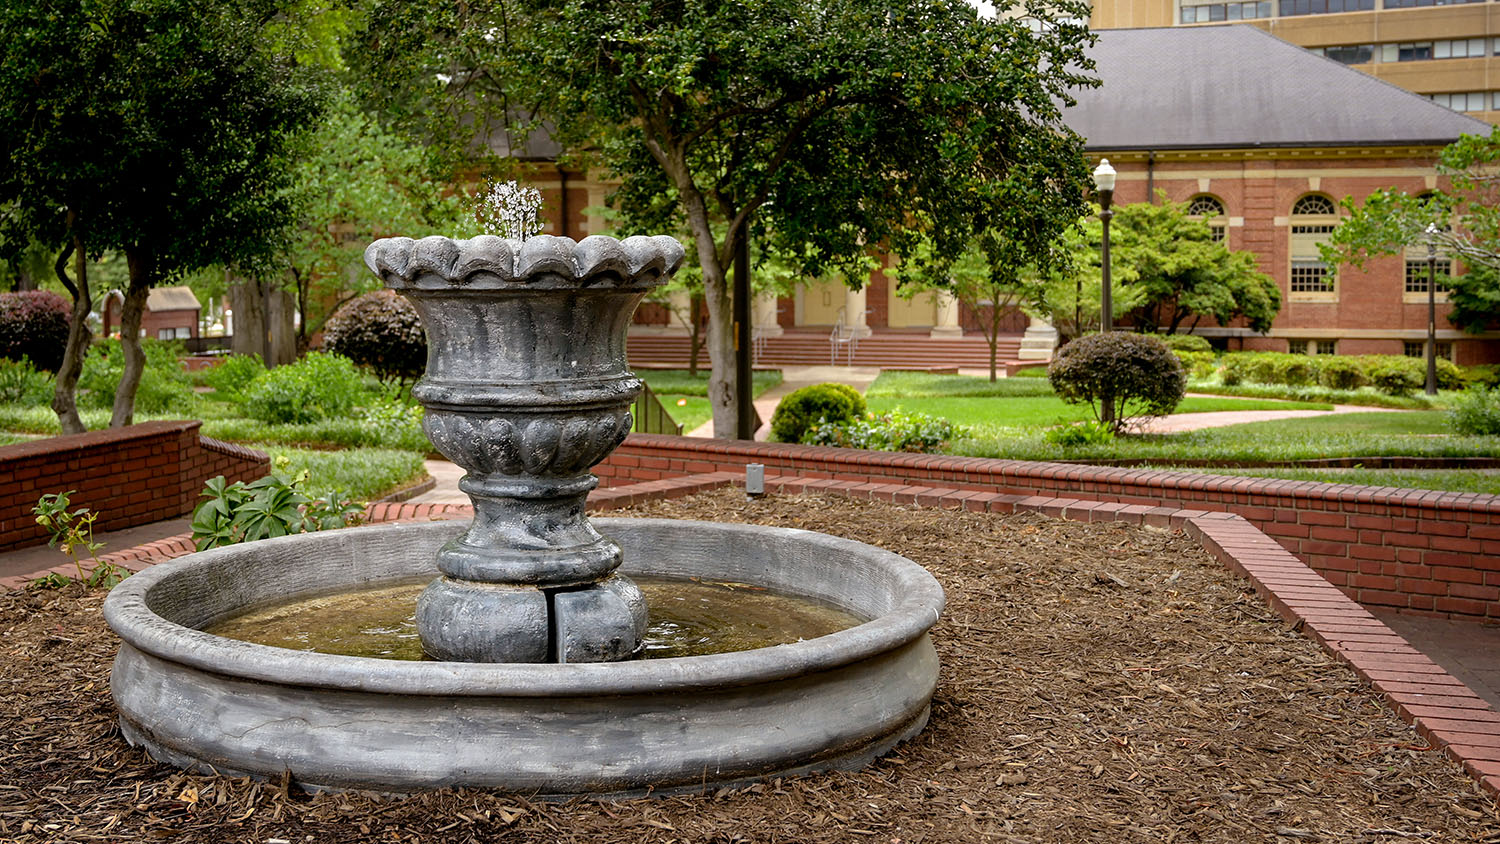 A fountain erupts with water in the foreground at Mary Yarbrough Court, with trees and greenery in the background.